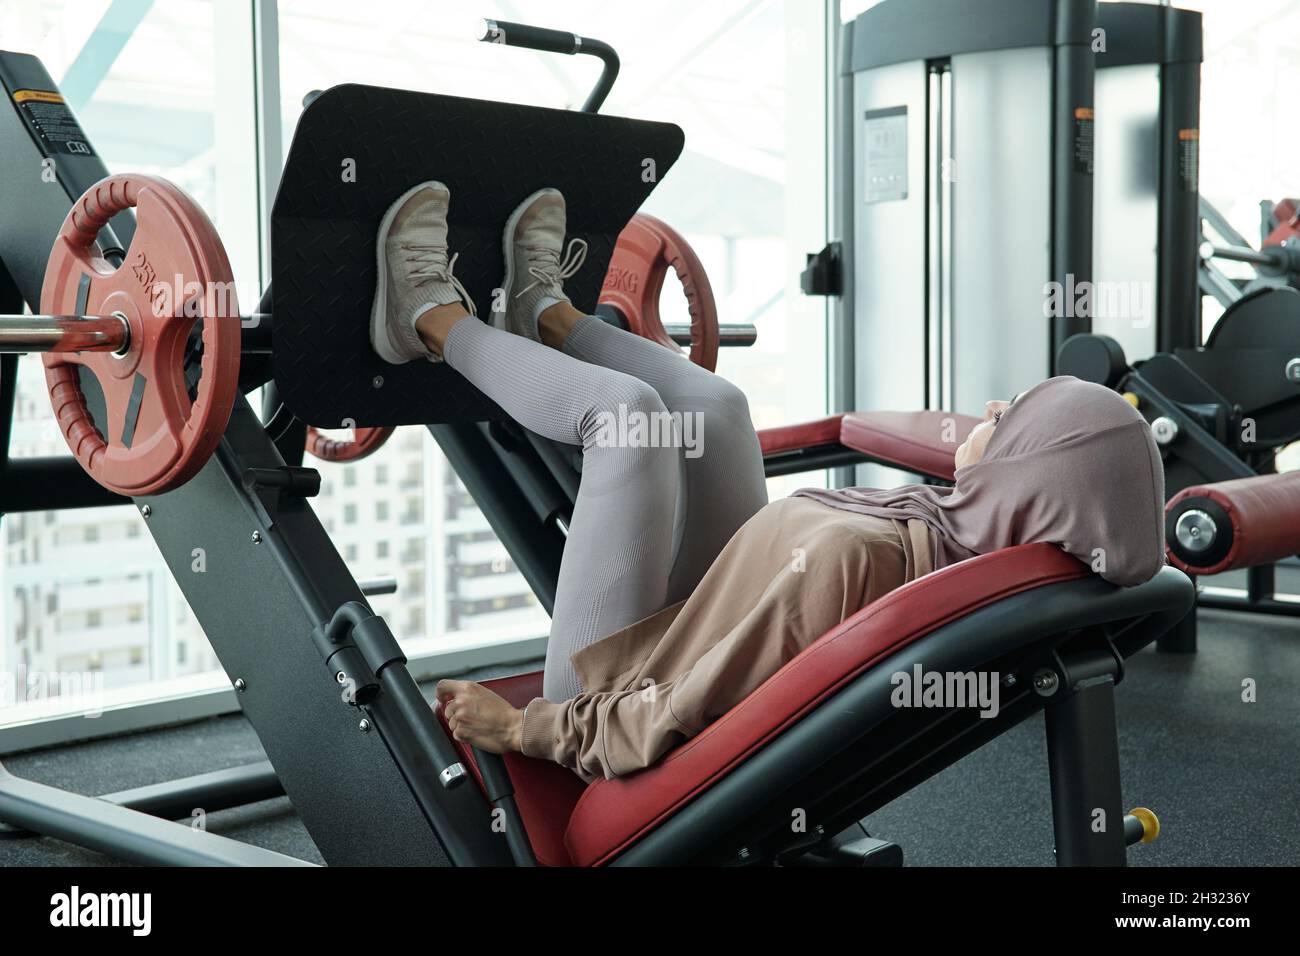 Young Muslim woman pushing part of sports equipment while doing difficult exercise in fitness center Stock Photo